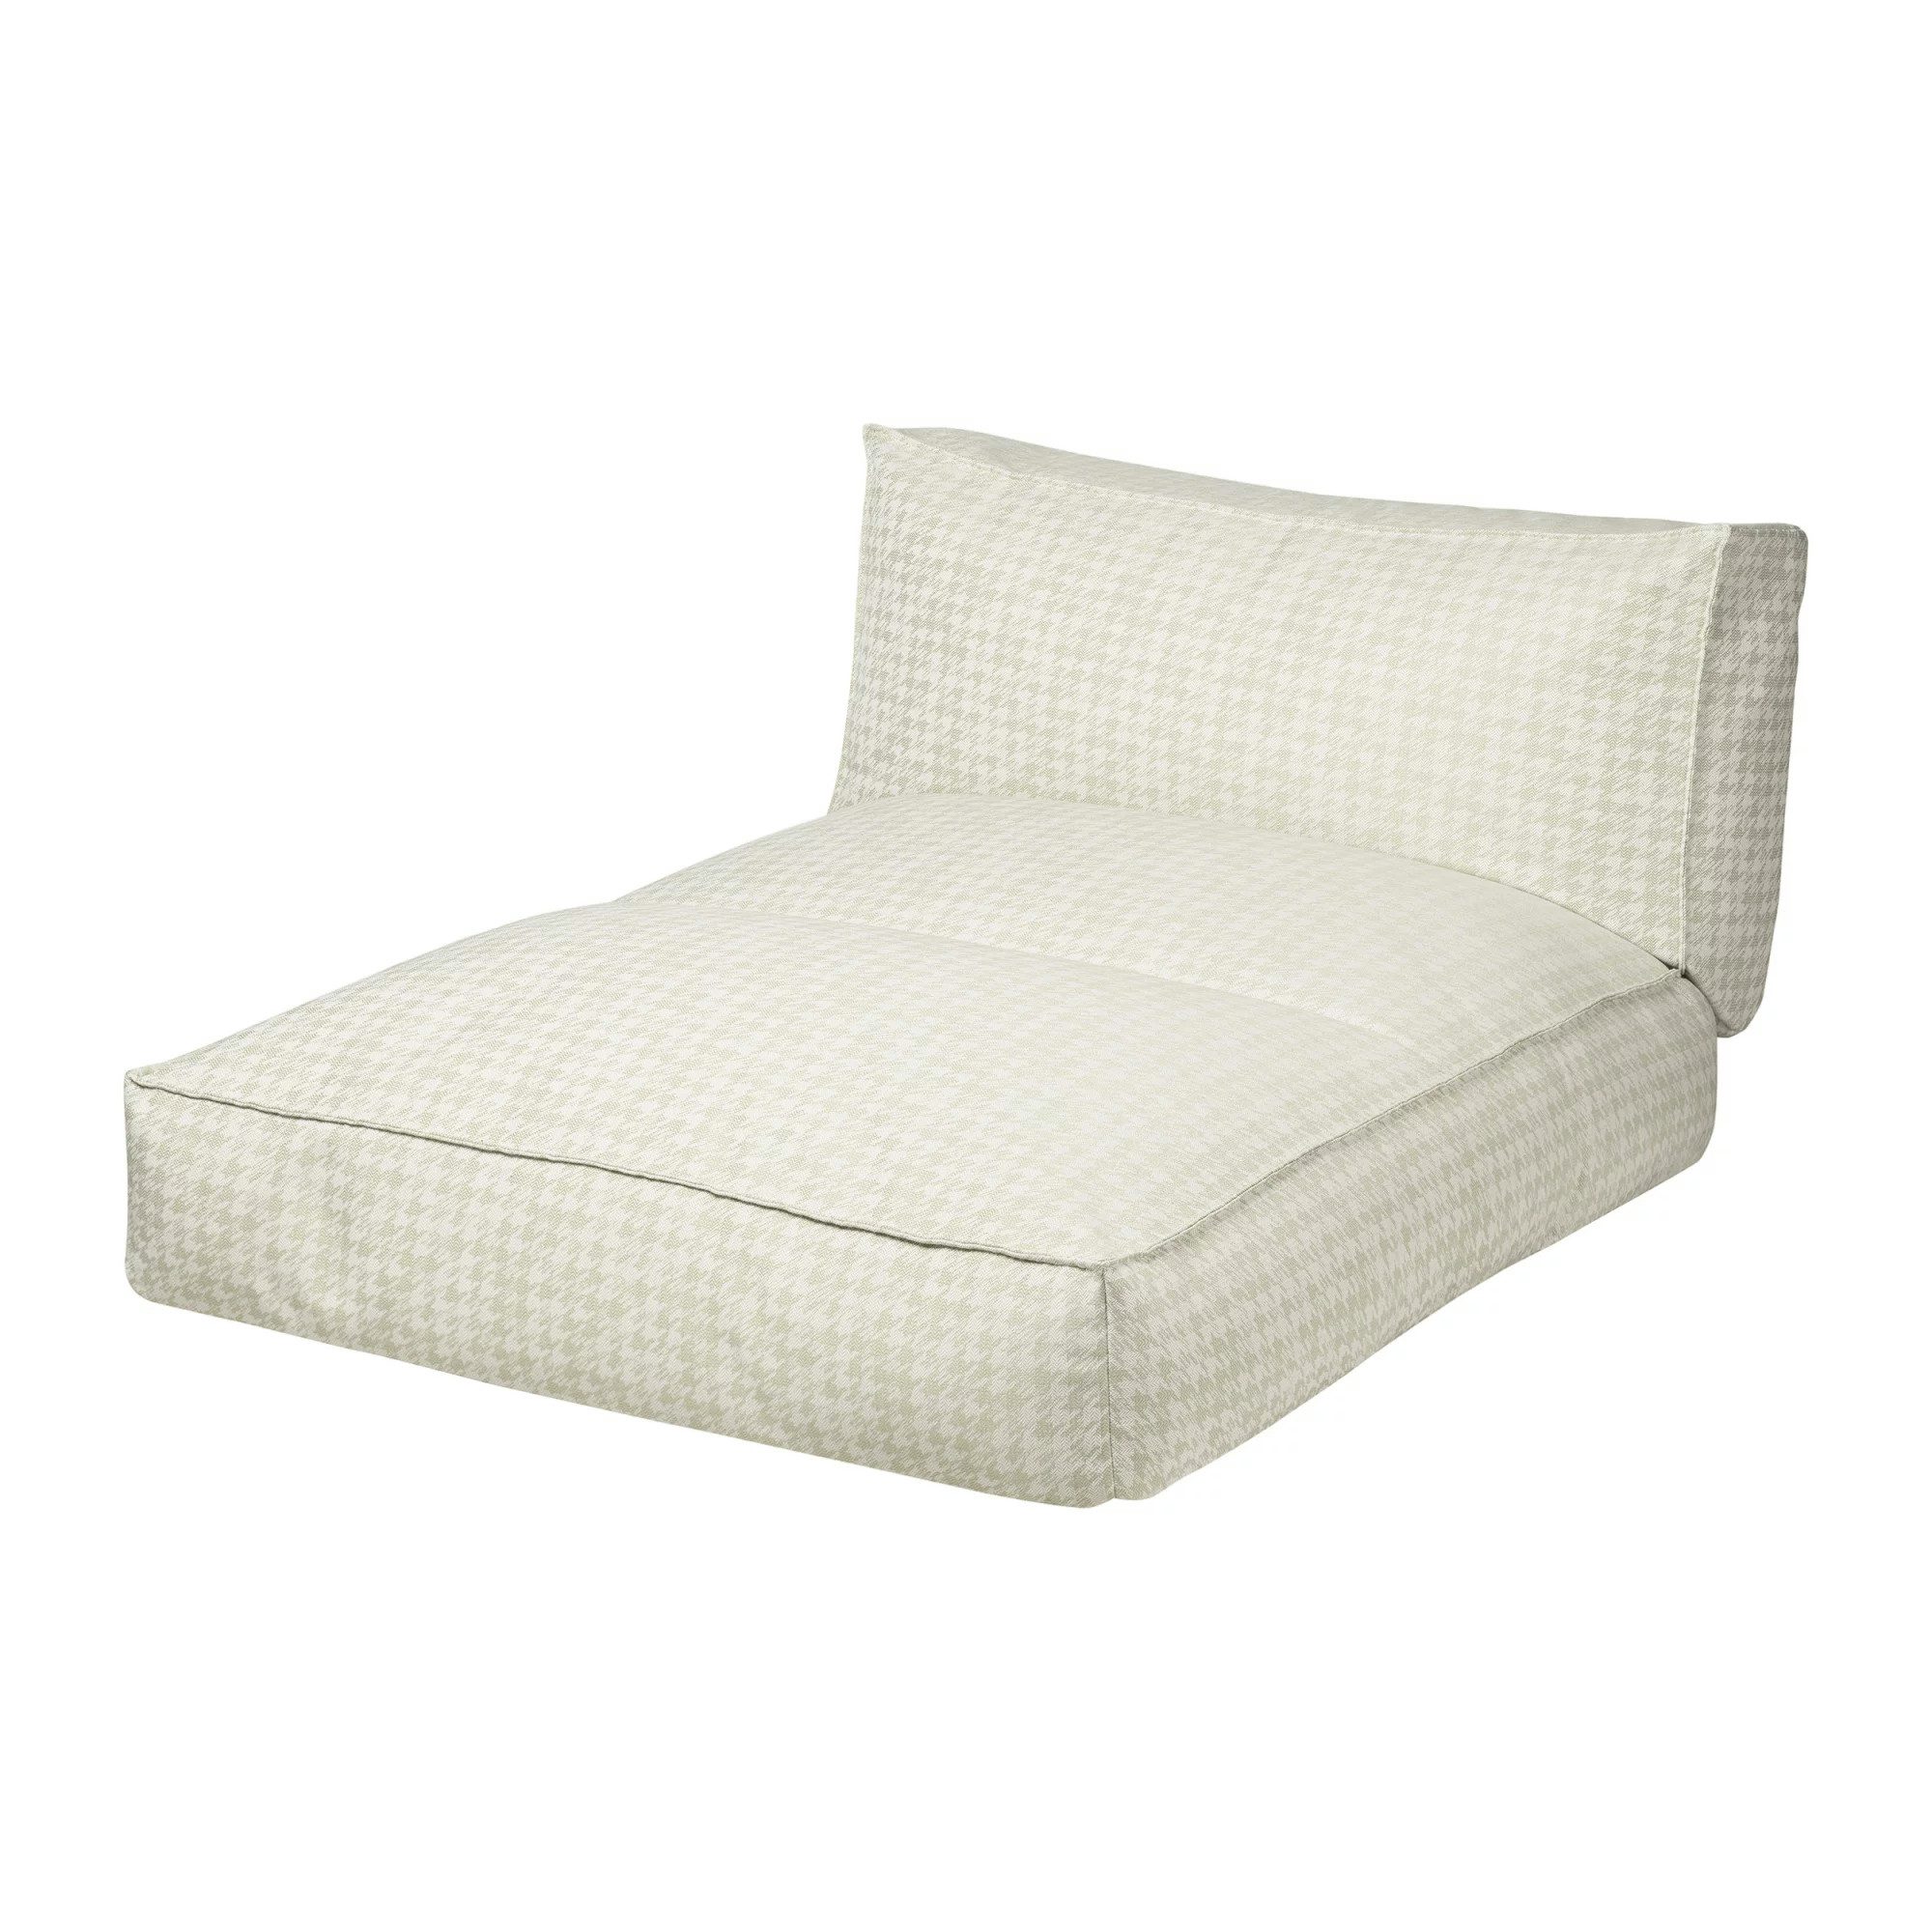 blomus Daybed Blomus Outdoor-Bett -Stay- Special Edition Stoff Twigh Sand